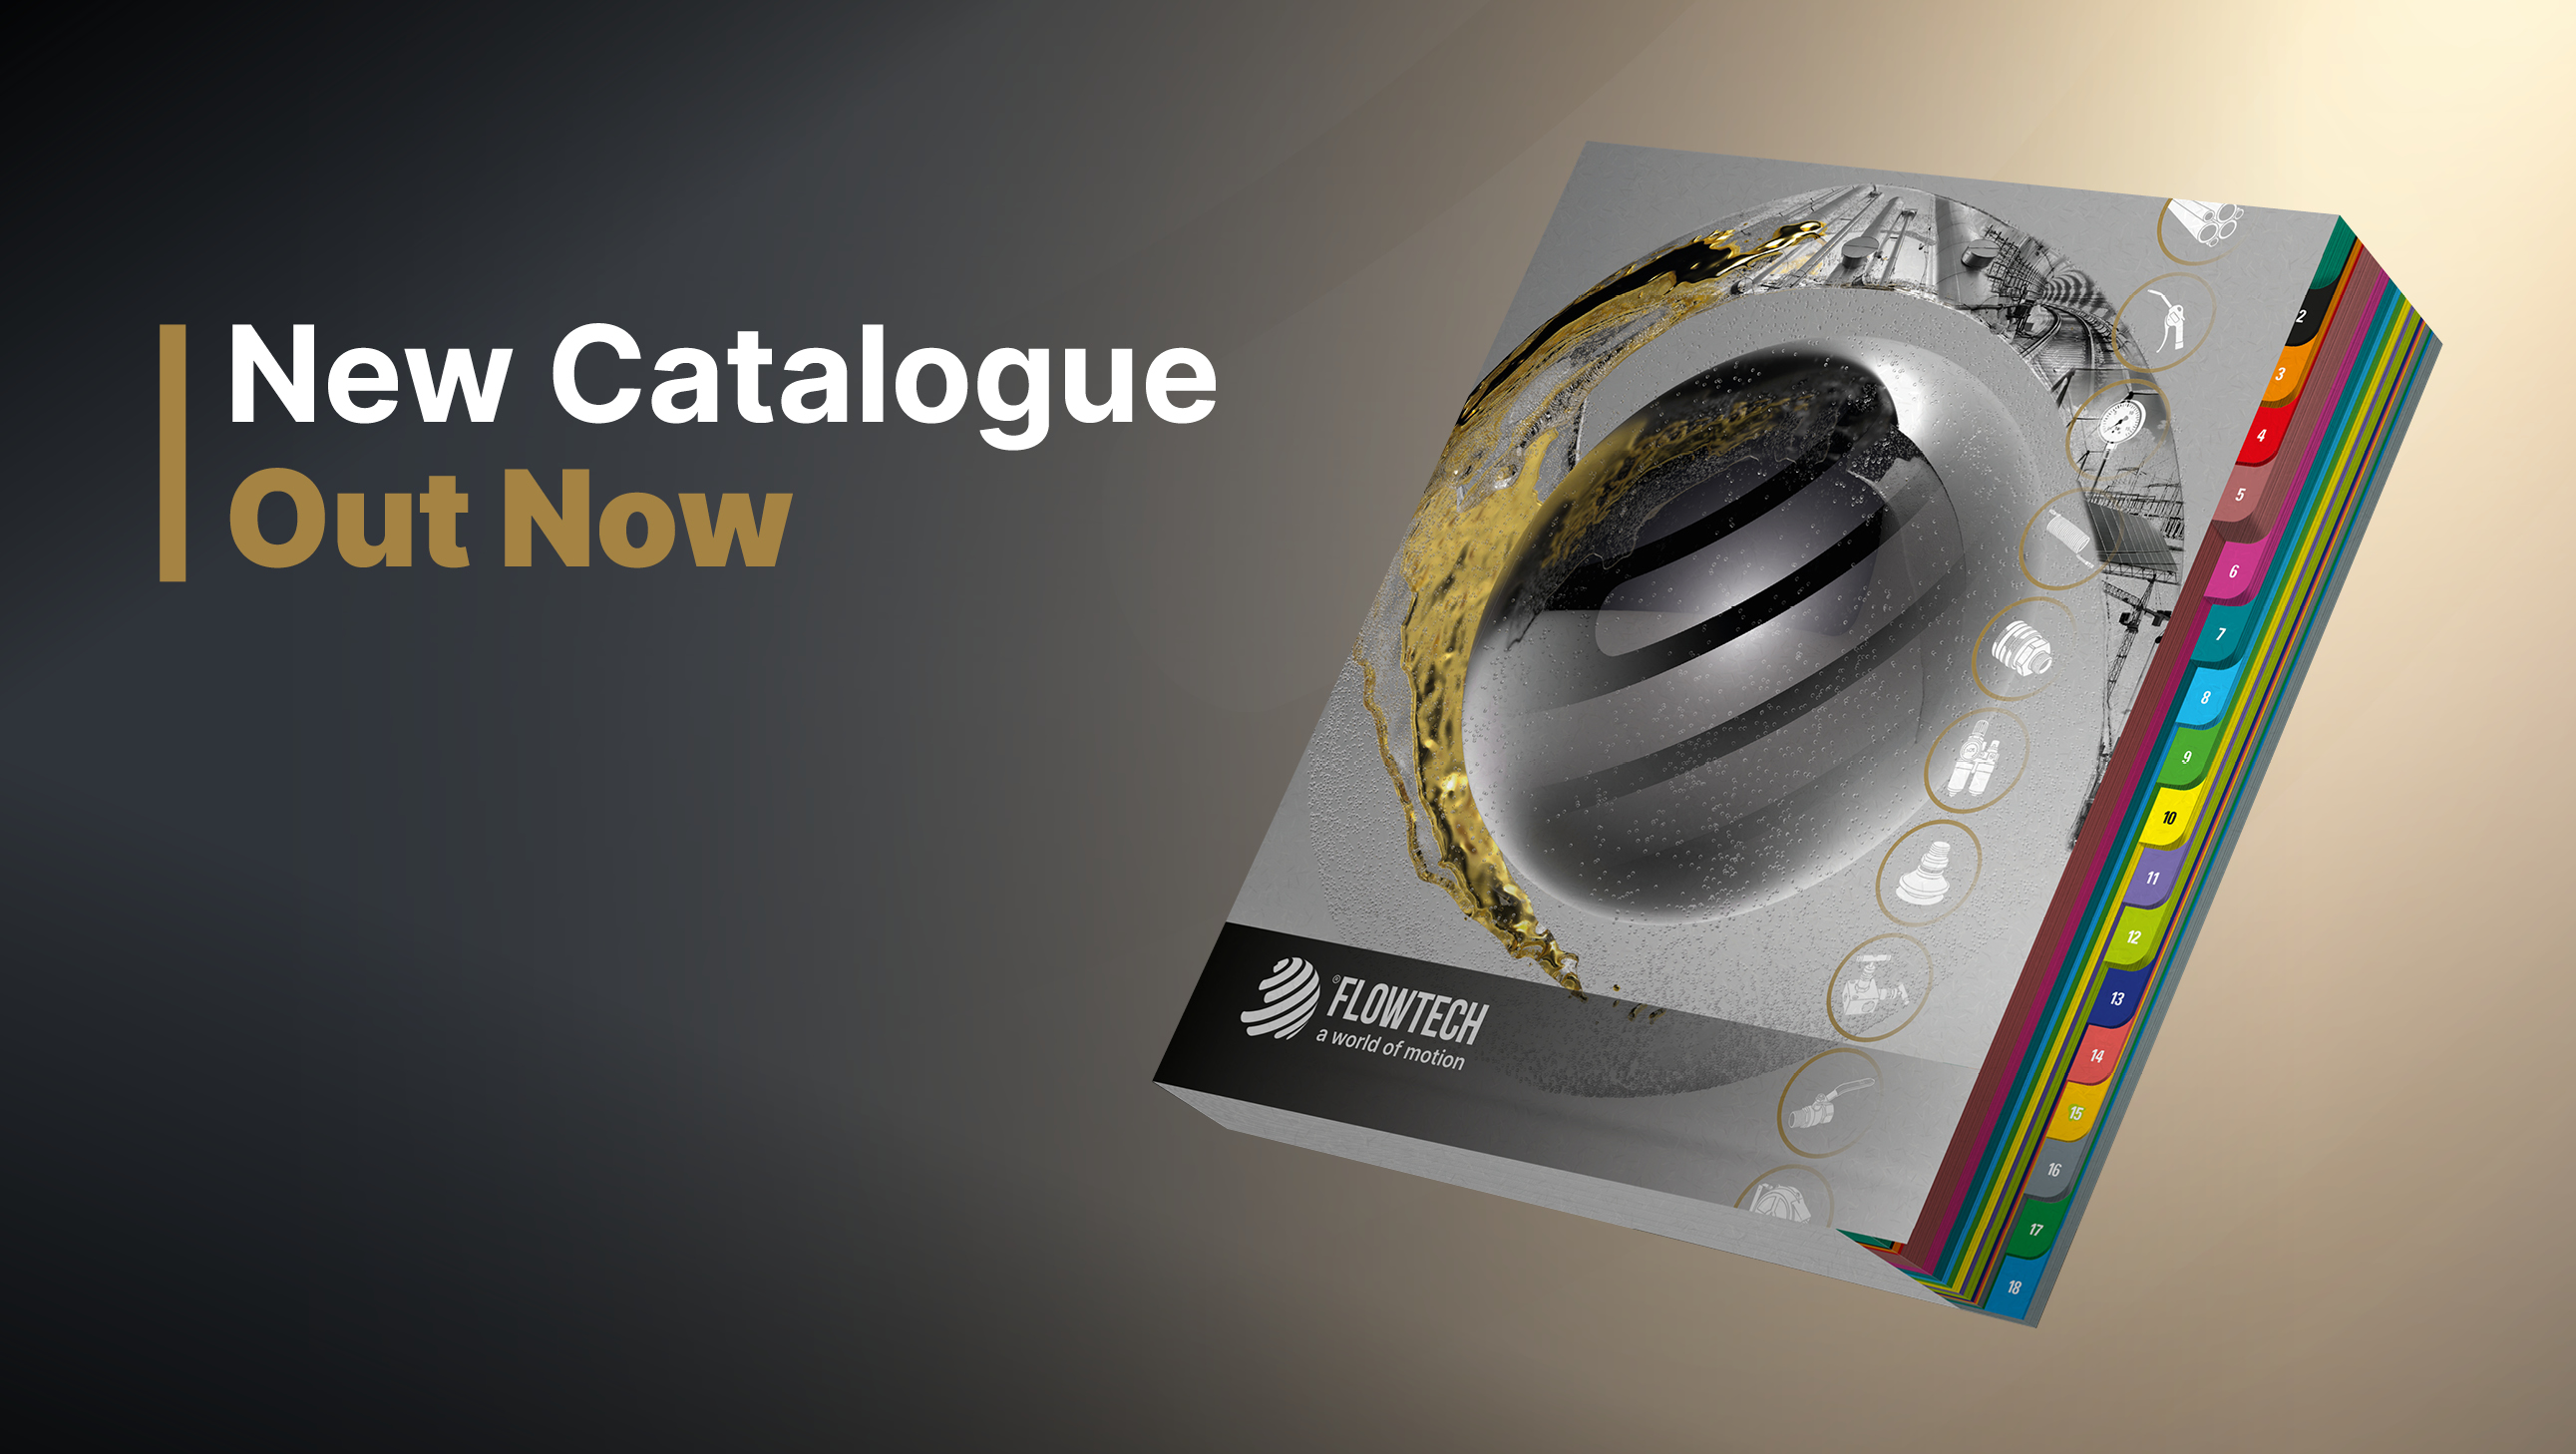 Introducing Our New Catalogue